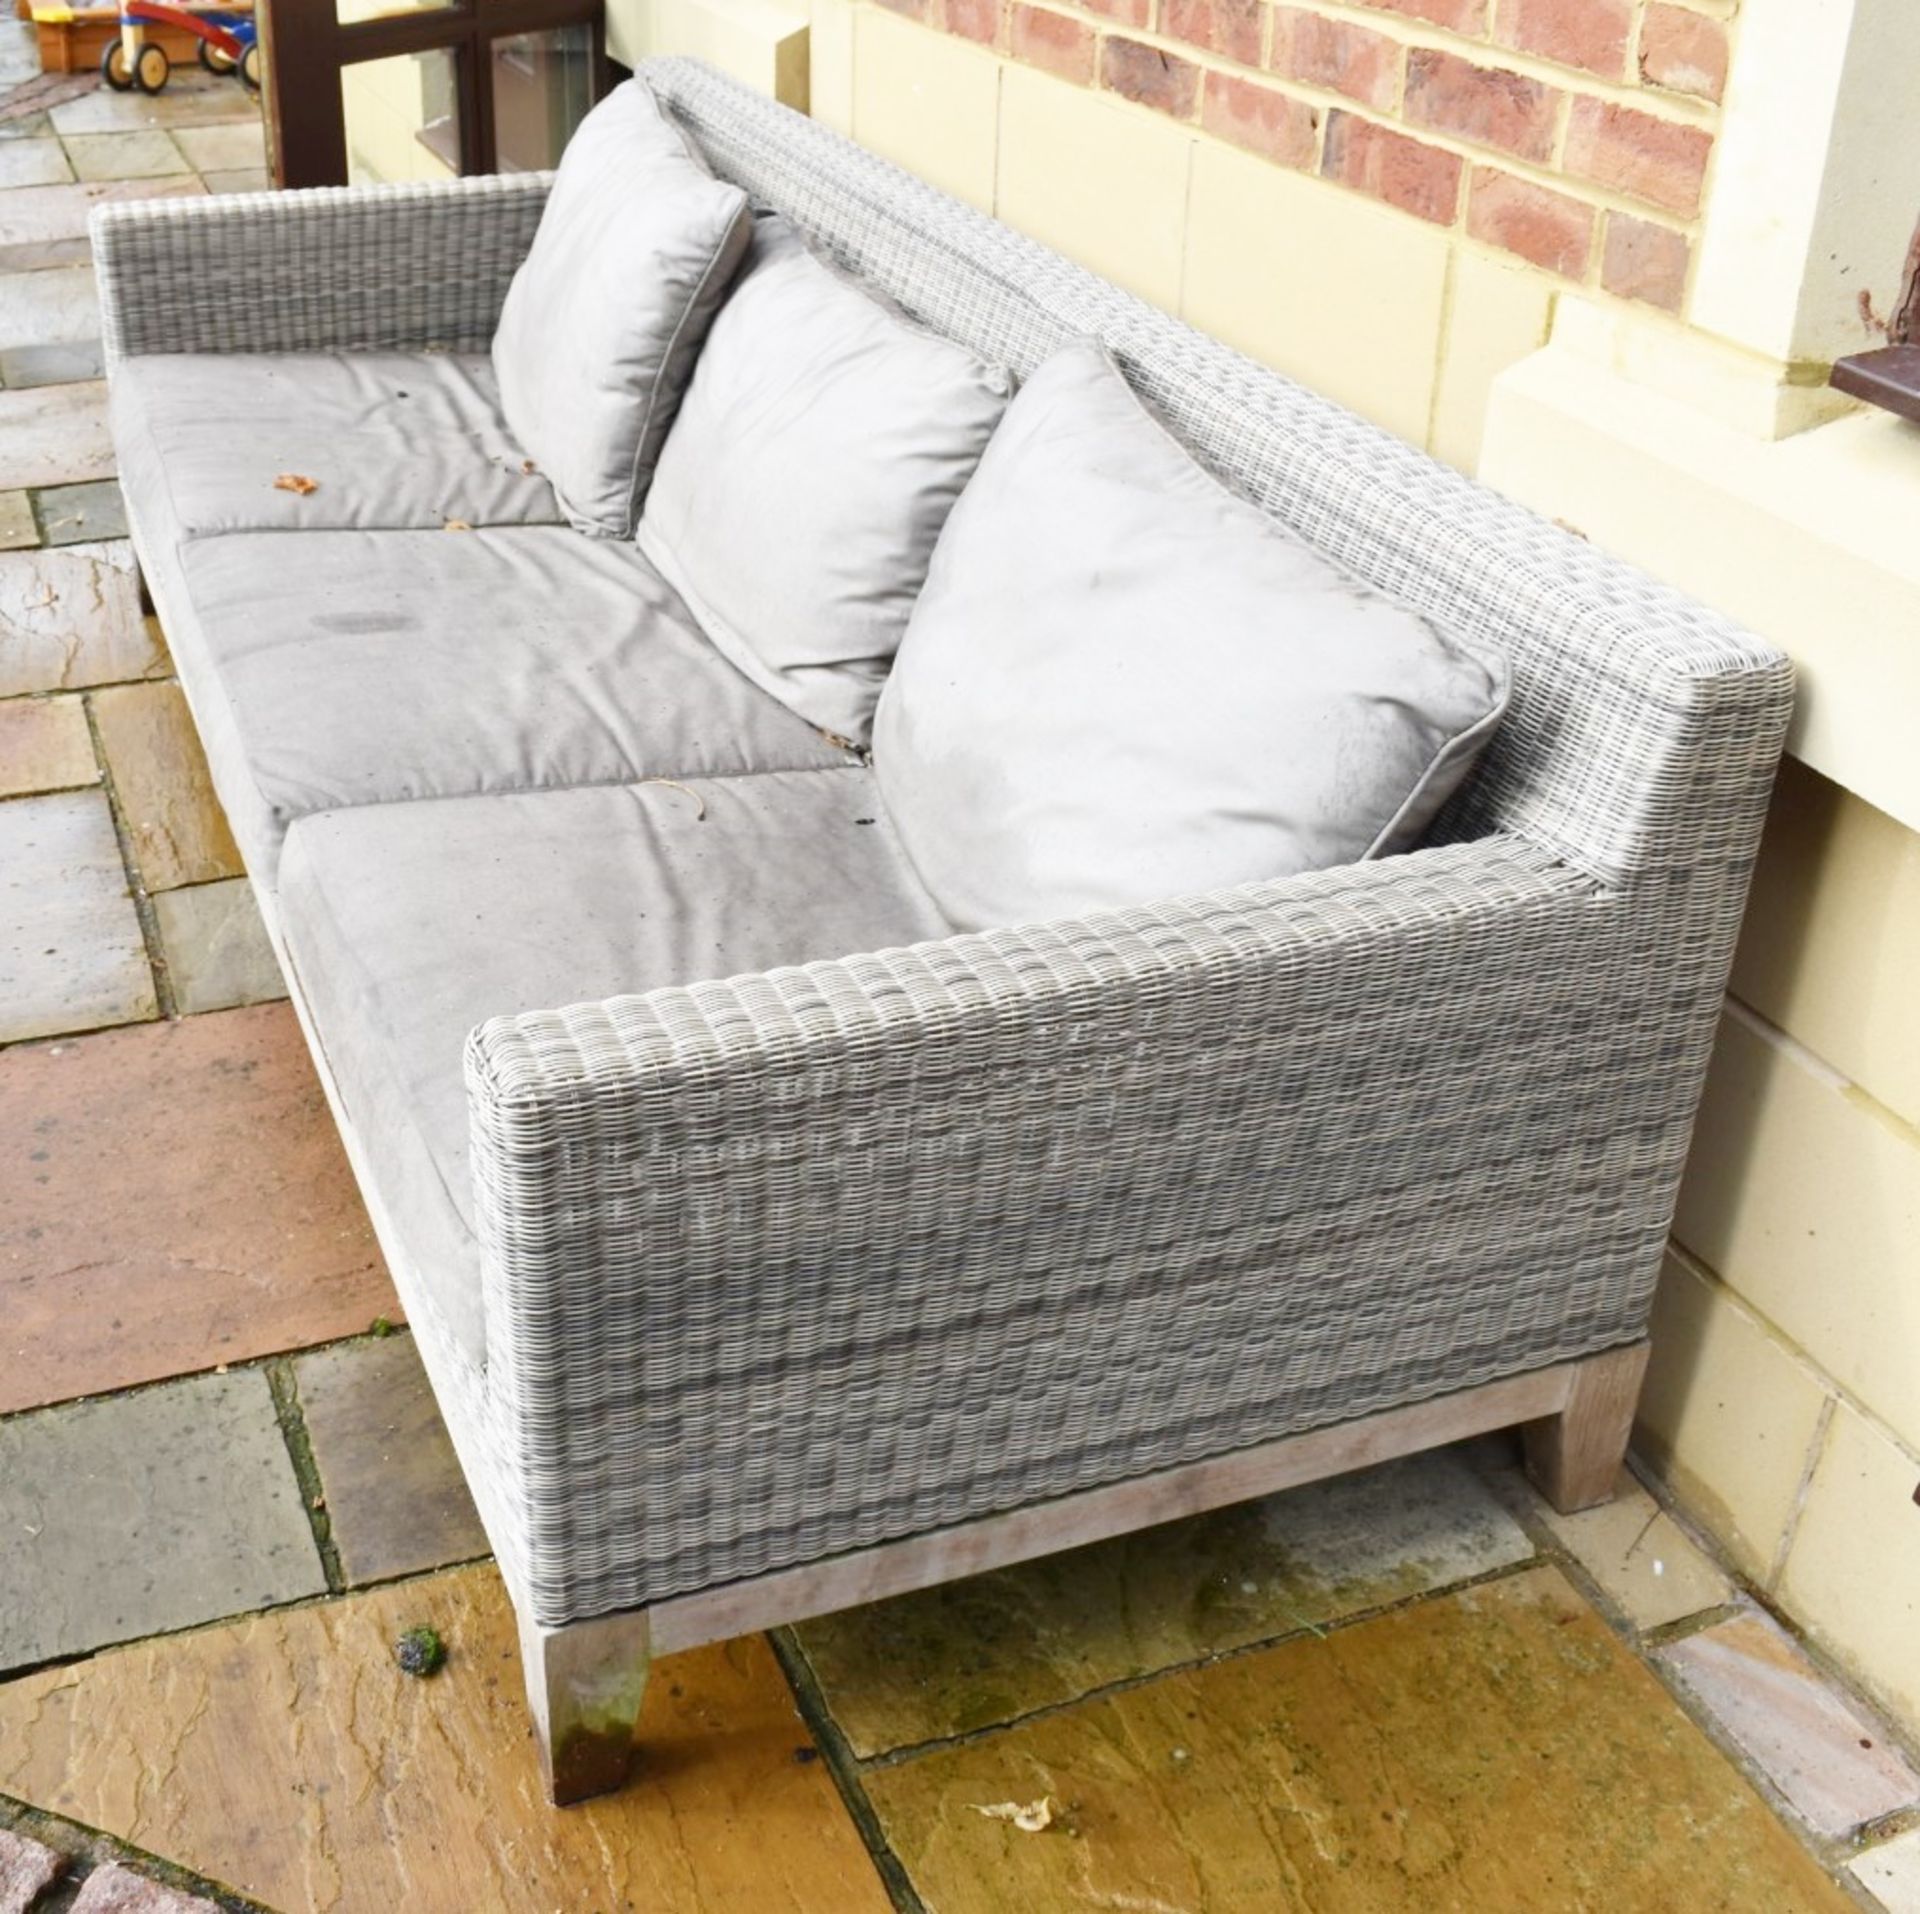 1 x Outdoor Garden Rattan Sofa With Cushions and Hardwood Base - Size H60 x W240 x D90 cms - CL546 - - Image 2 of 4